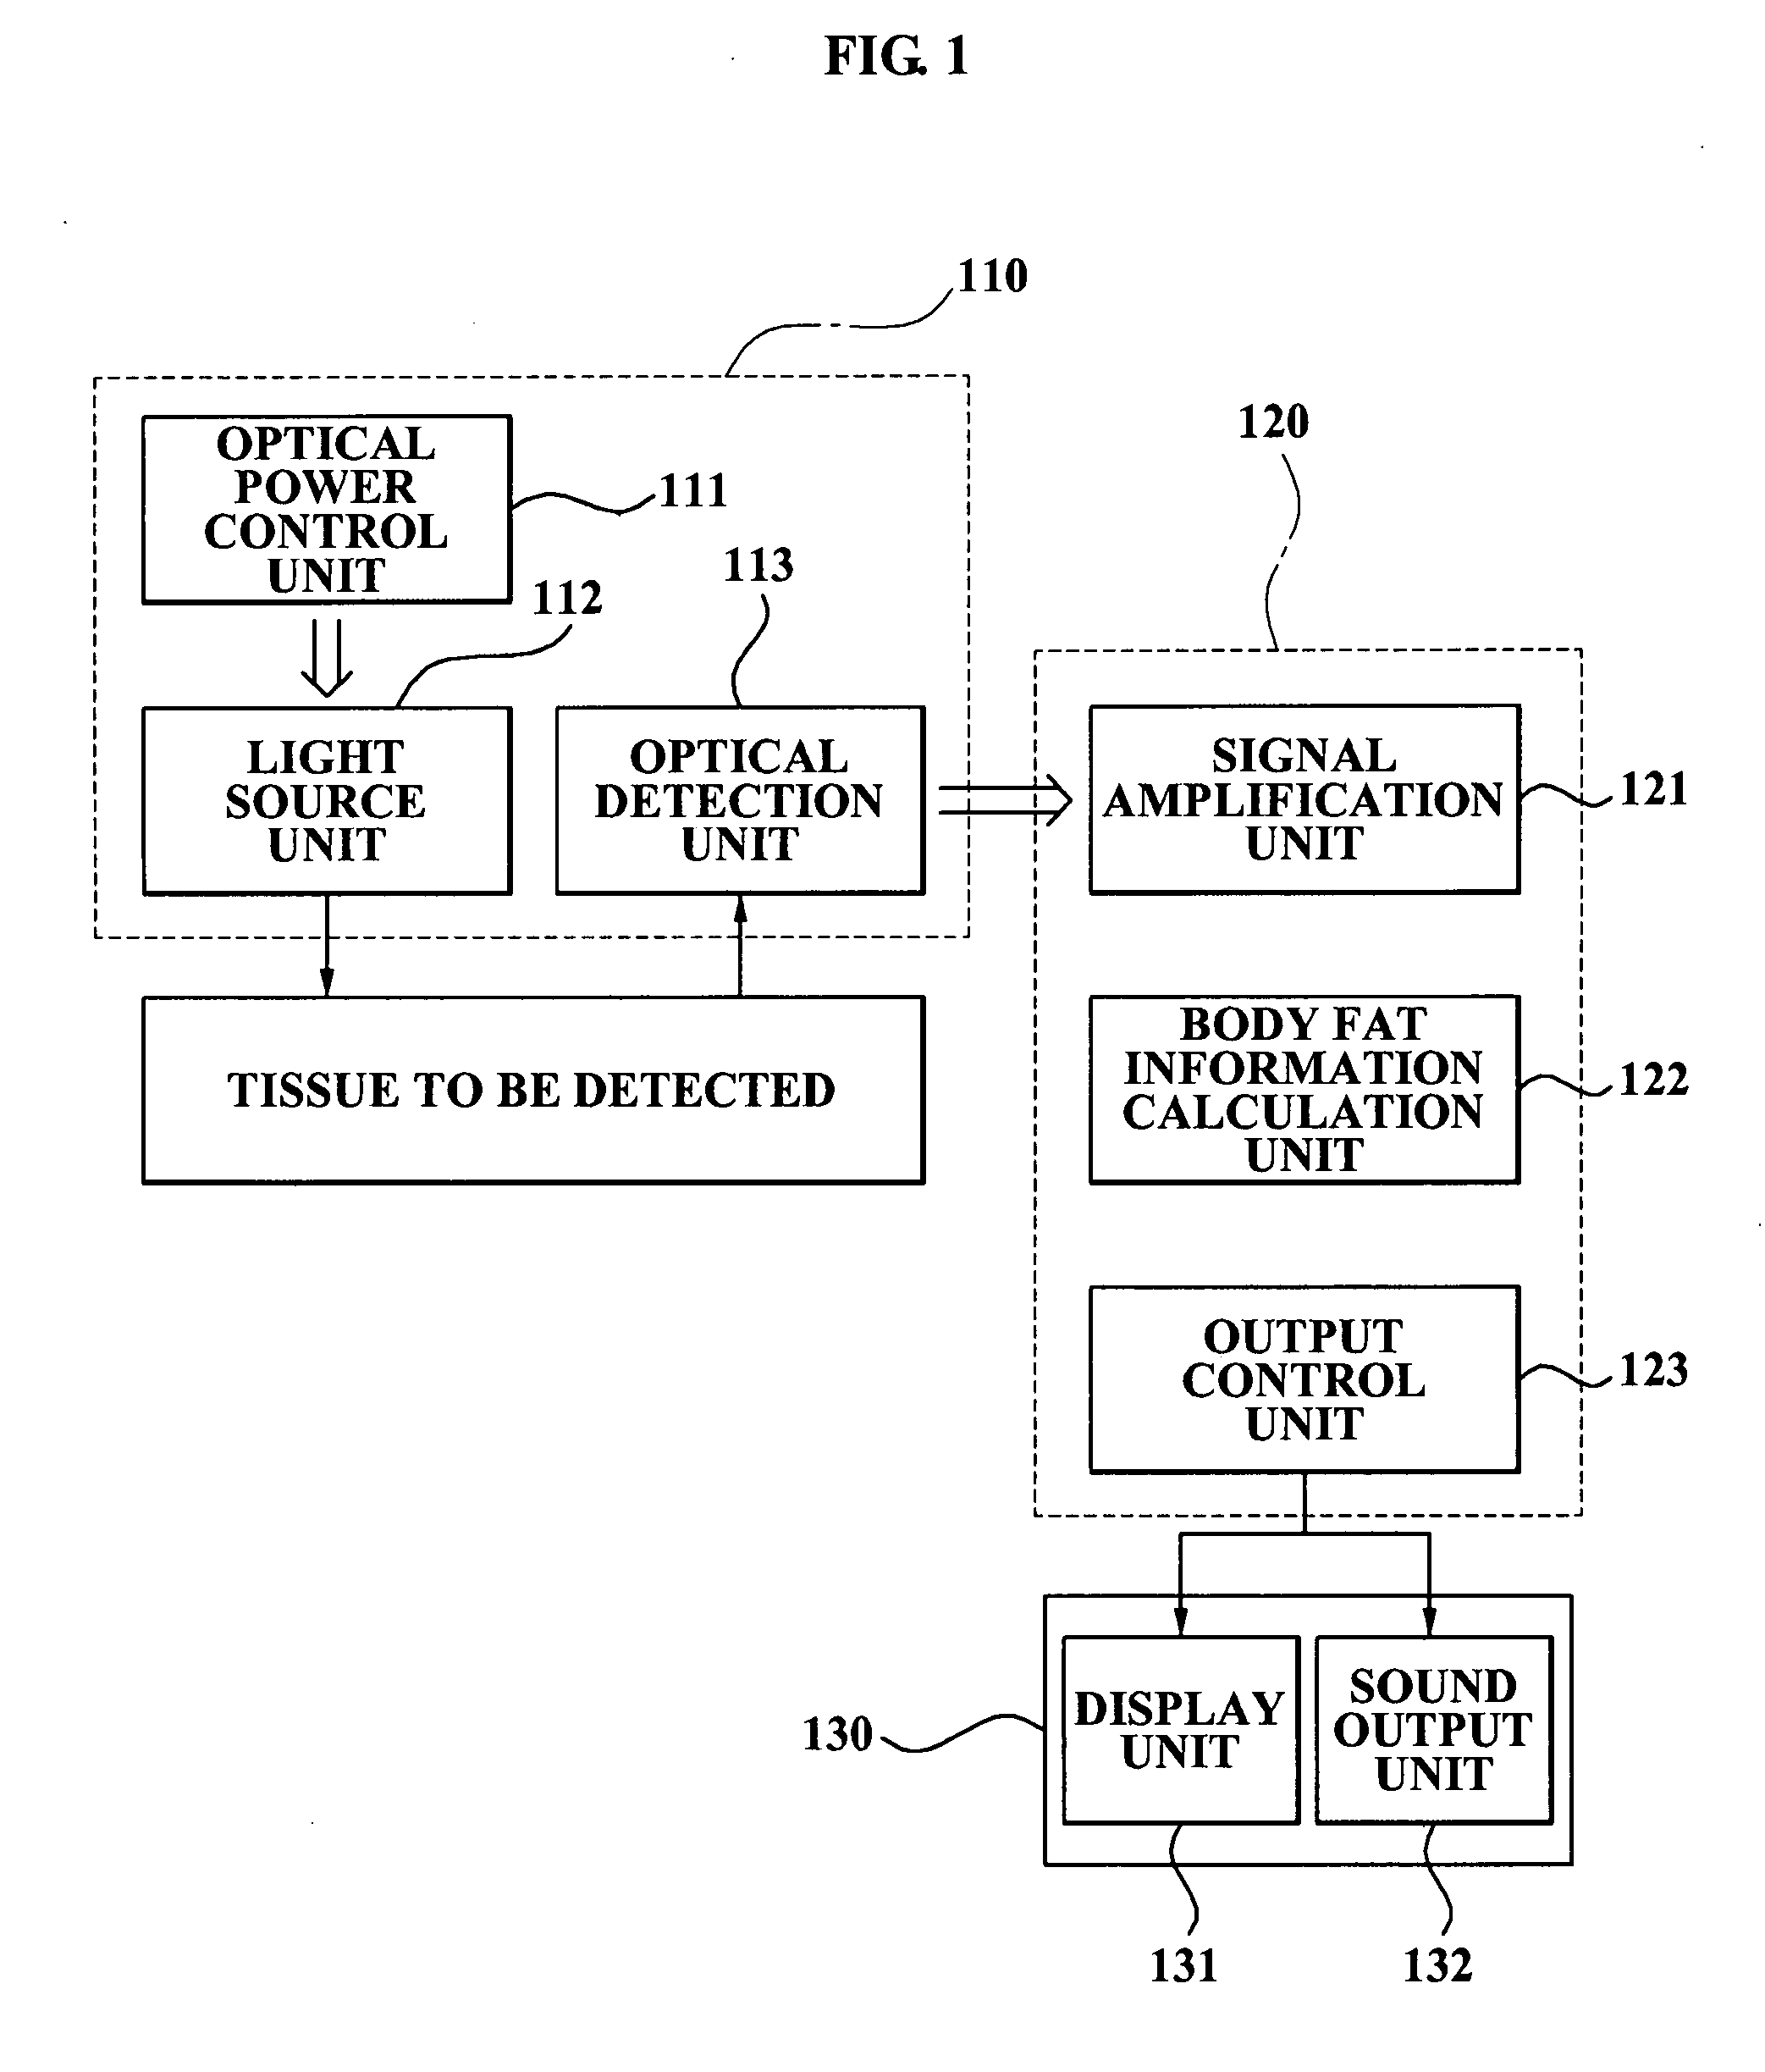 Portable body fat measurement device, method, and medium, using side-view light sources